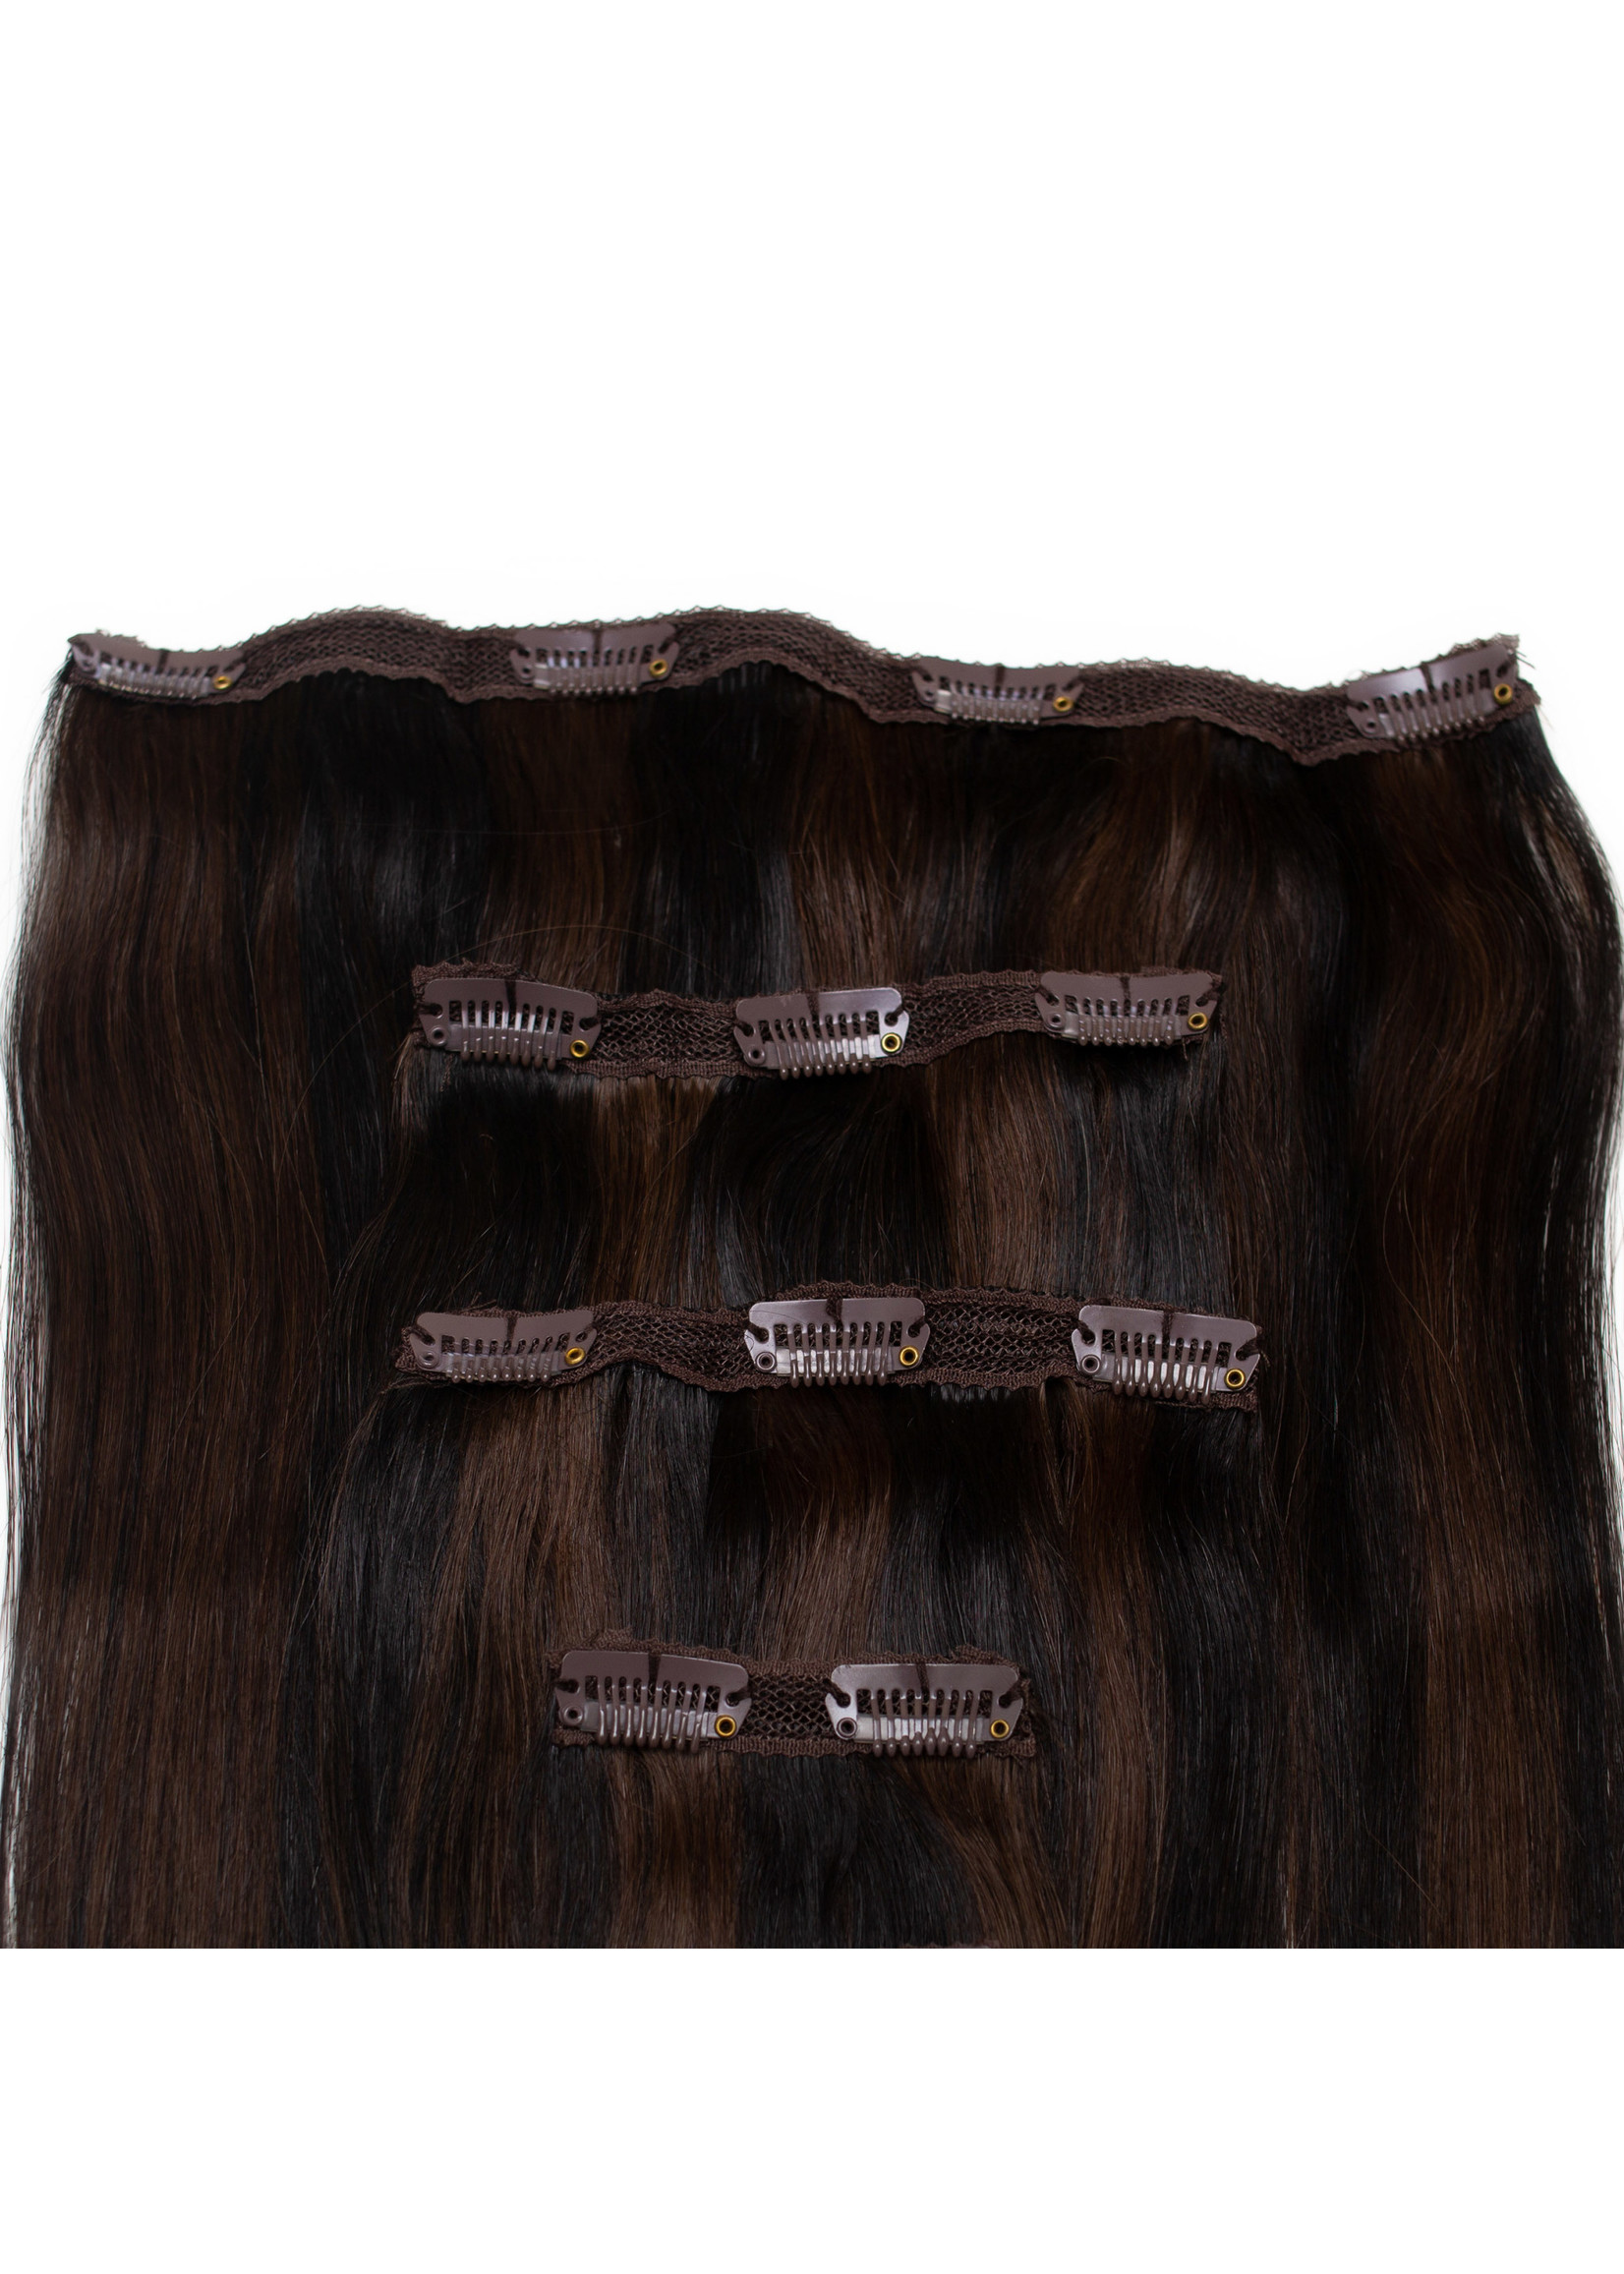 Seamless1 Seamless1 Human Hair Clip-in 5pc Hair Extensions 21.5 Inches - Ritzy Blend